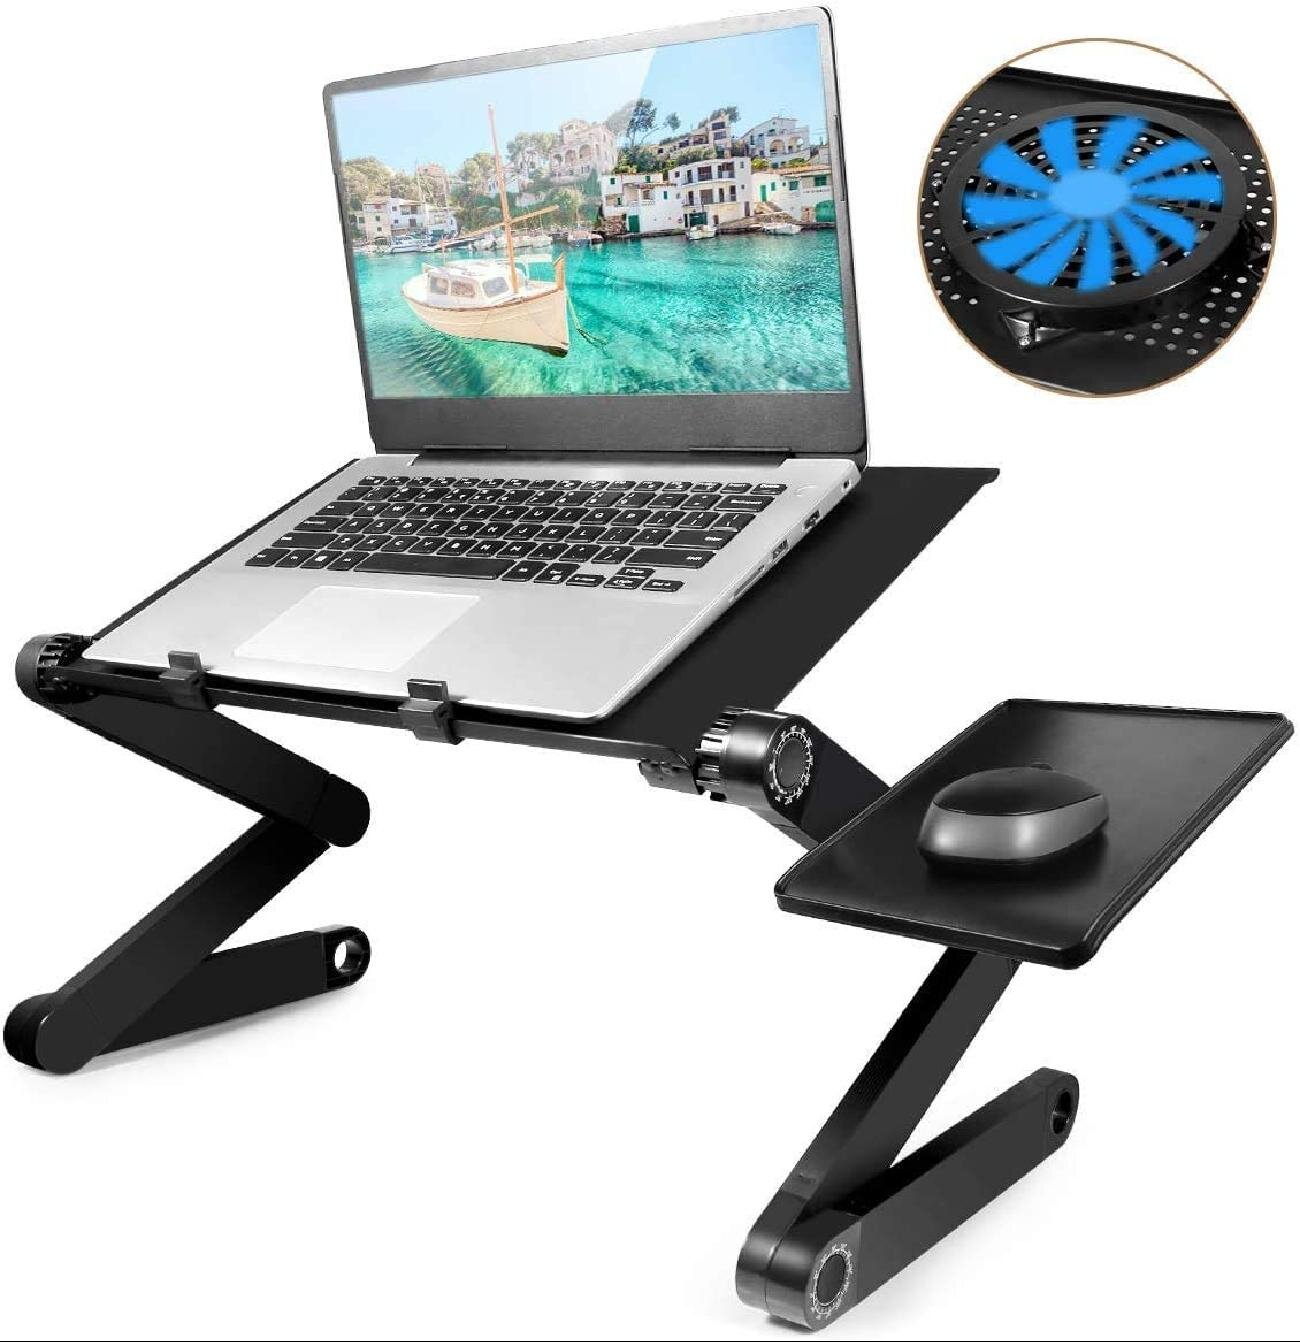 Deluxe Comfort Multi functional Laptop Table Stand